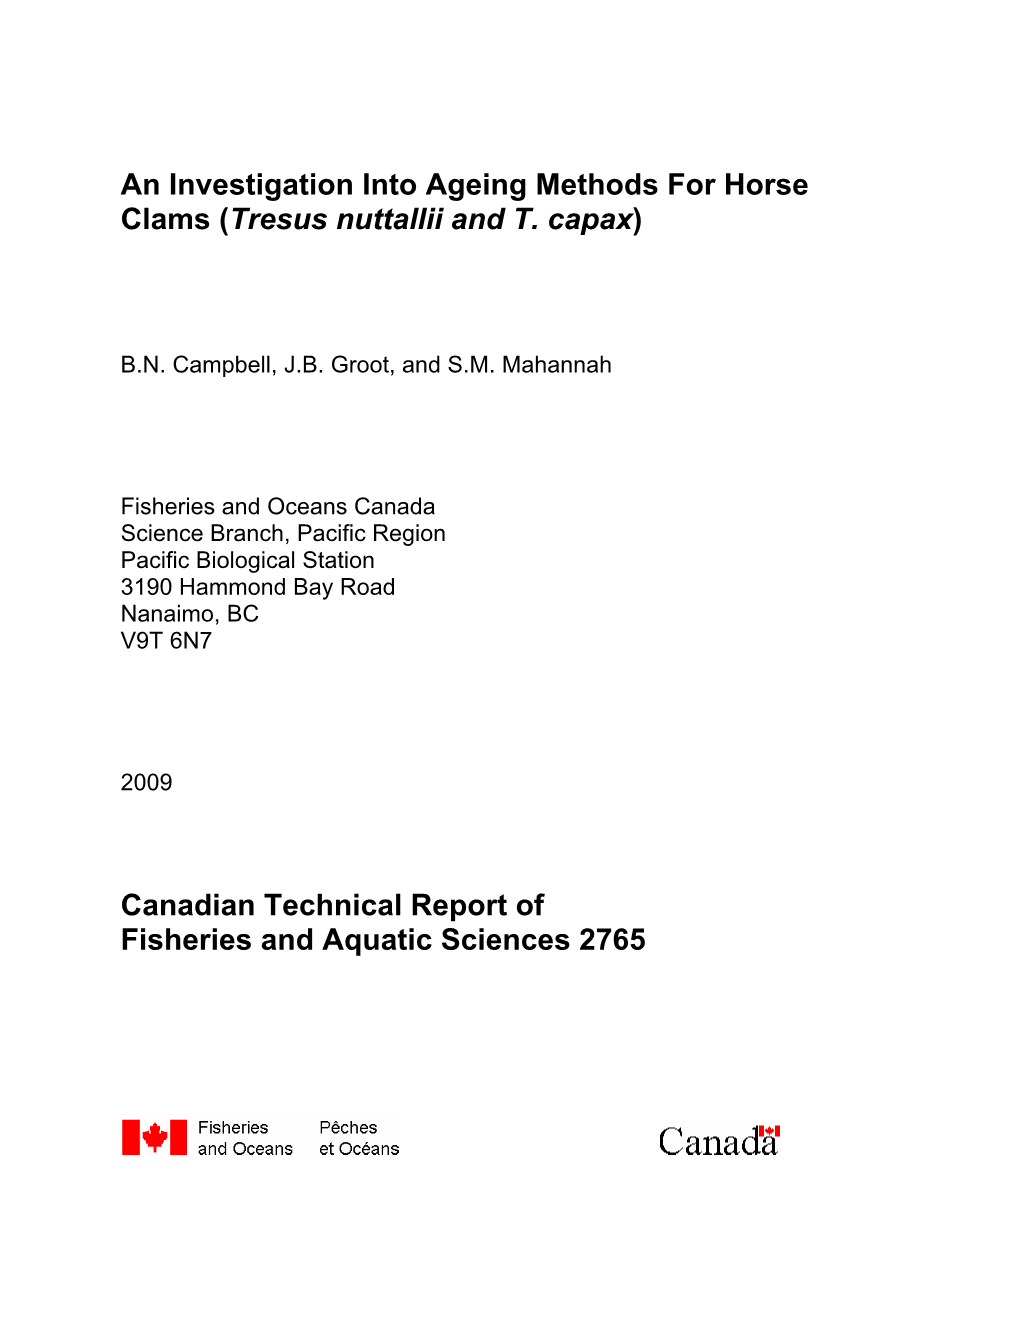 An Investigation Into Ageing Methods for Horse Clams (Tresus Nuttallii and T